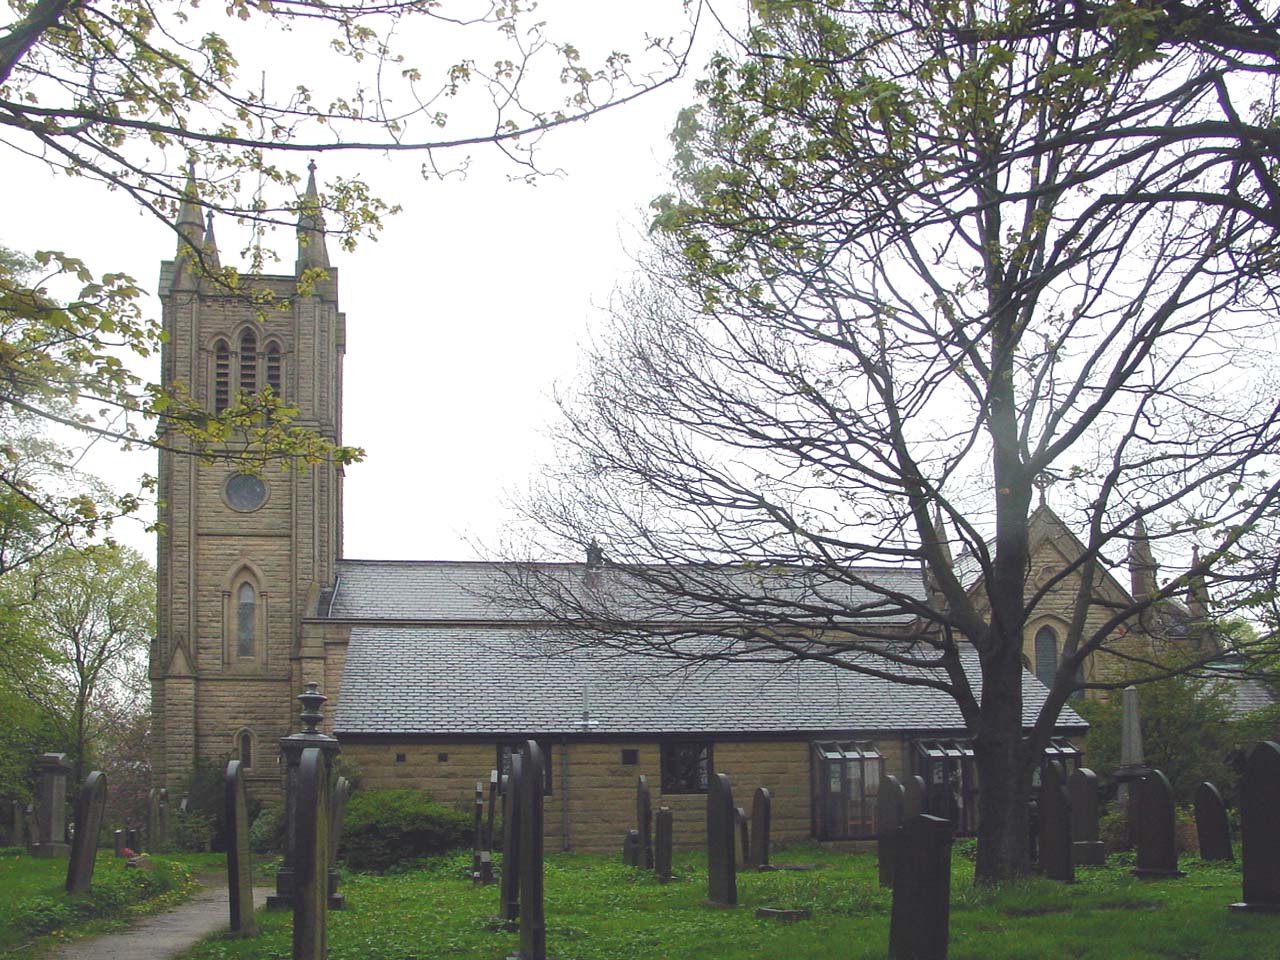 St Peter's Church from the back